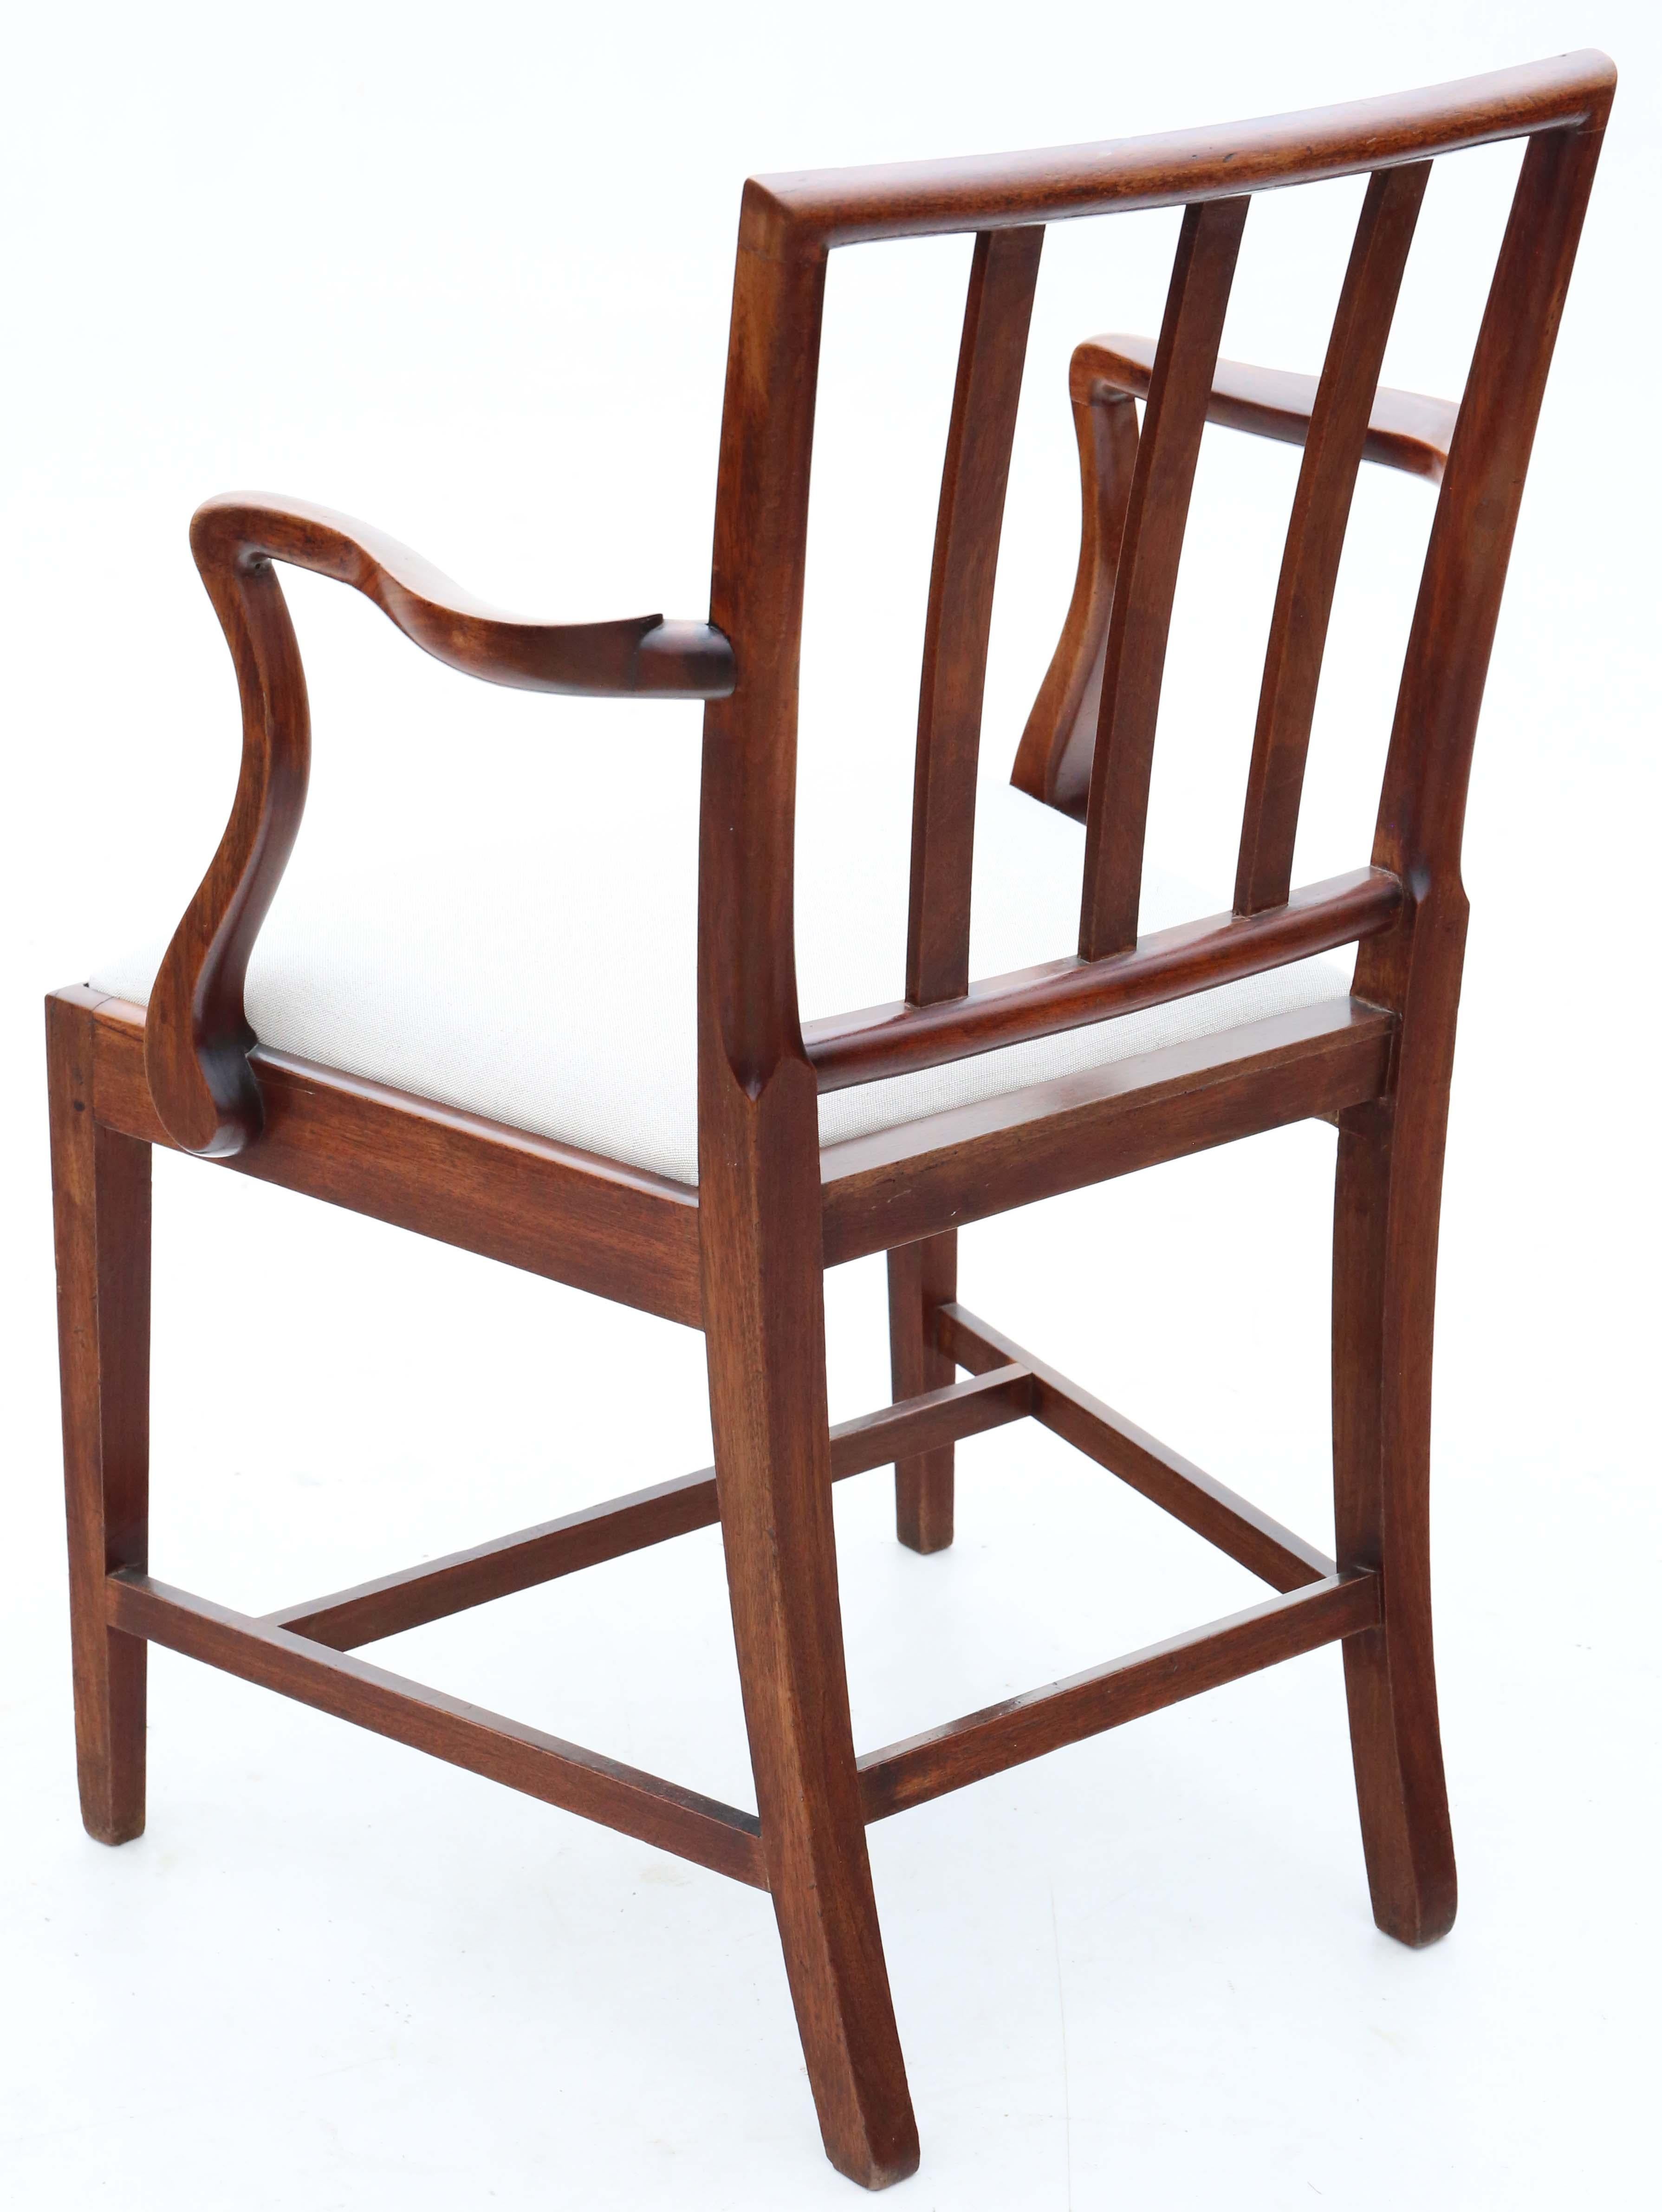 Regency Mahogany Dining Chairs: Set of 8 (6+2), Antique Quality, Early 19th C 1